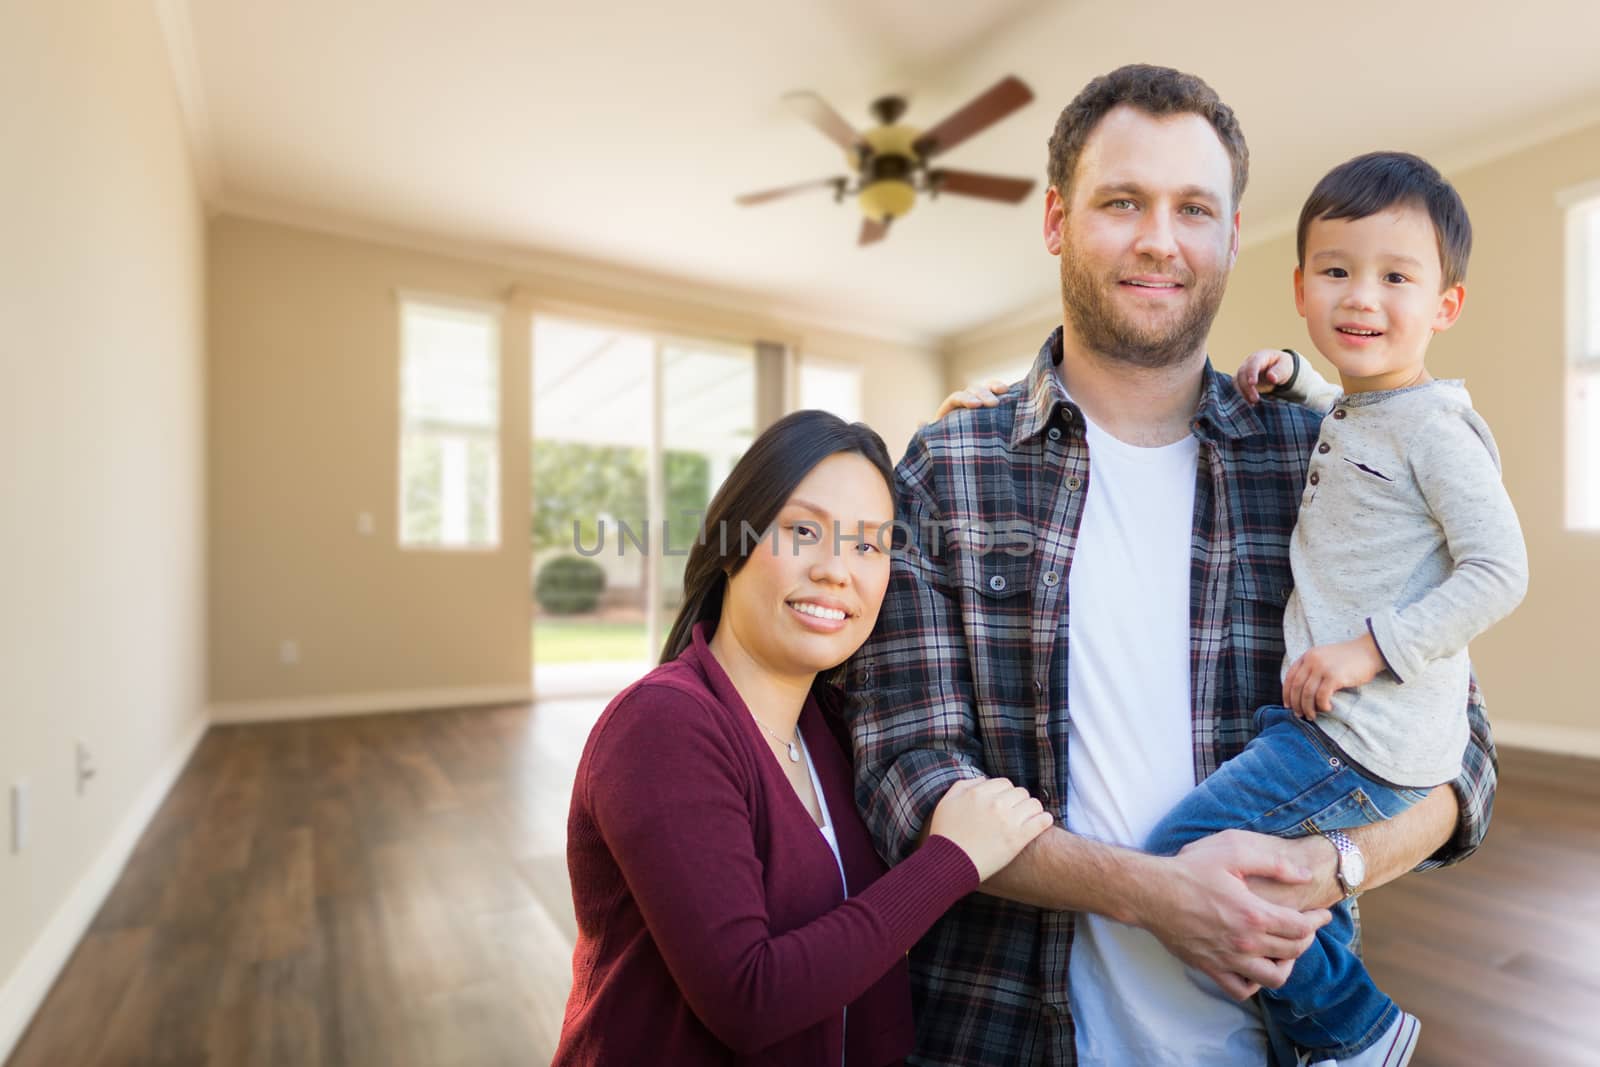 Mixed Race Chinese and Caucasian Parents and Child Inside Empty Room of New House.